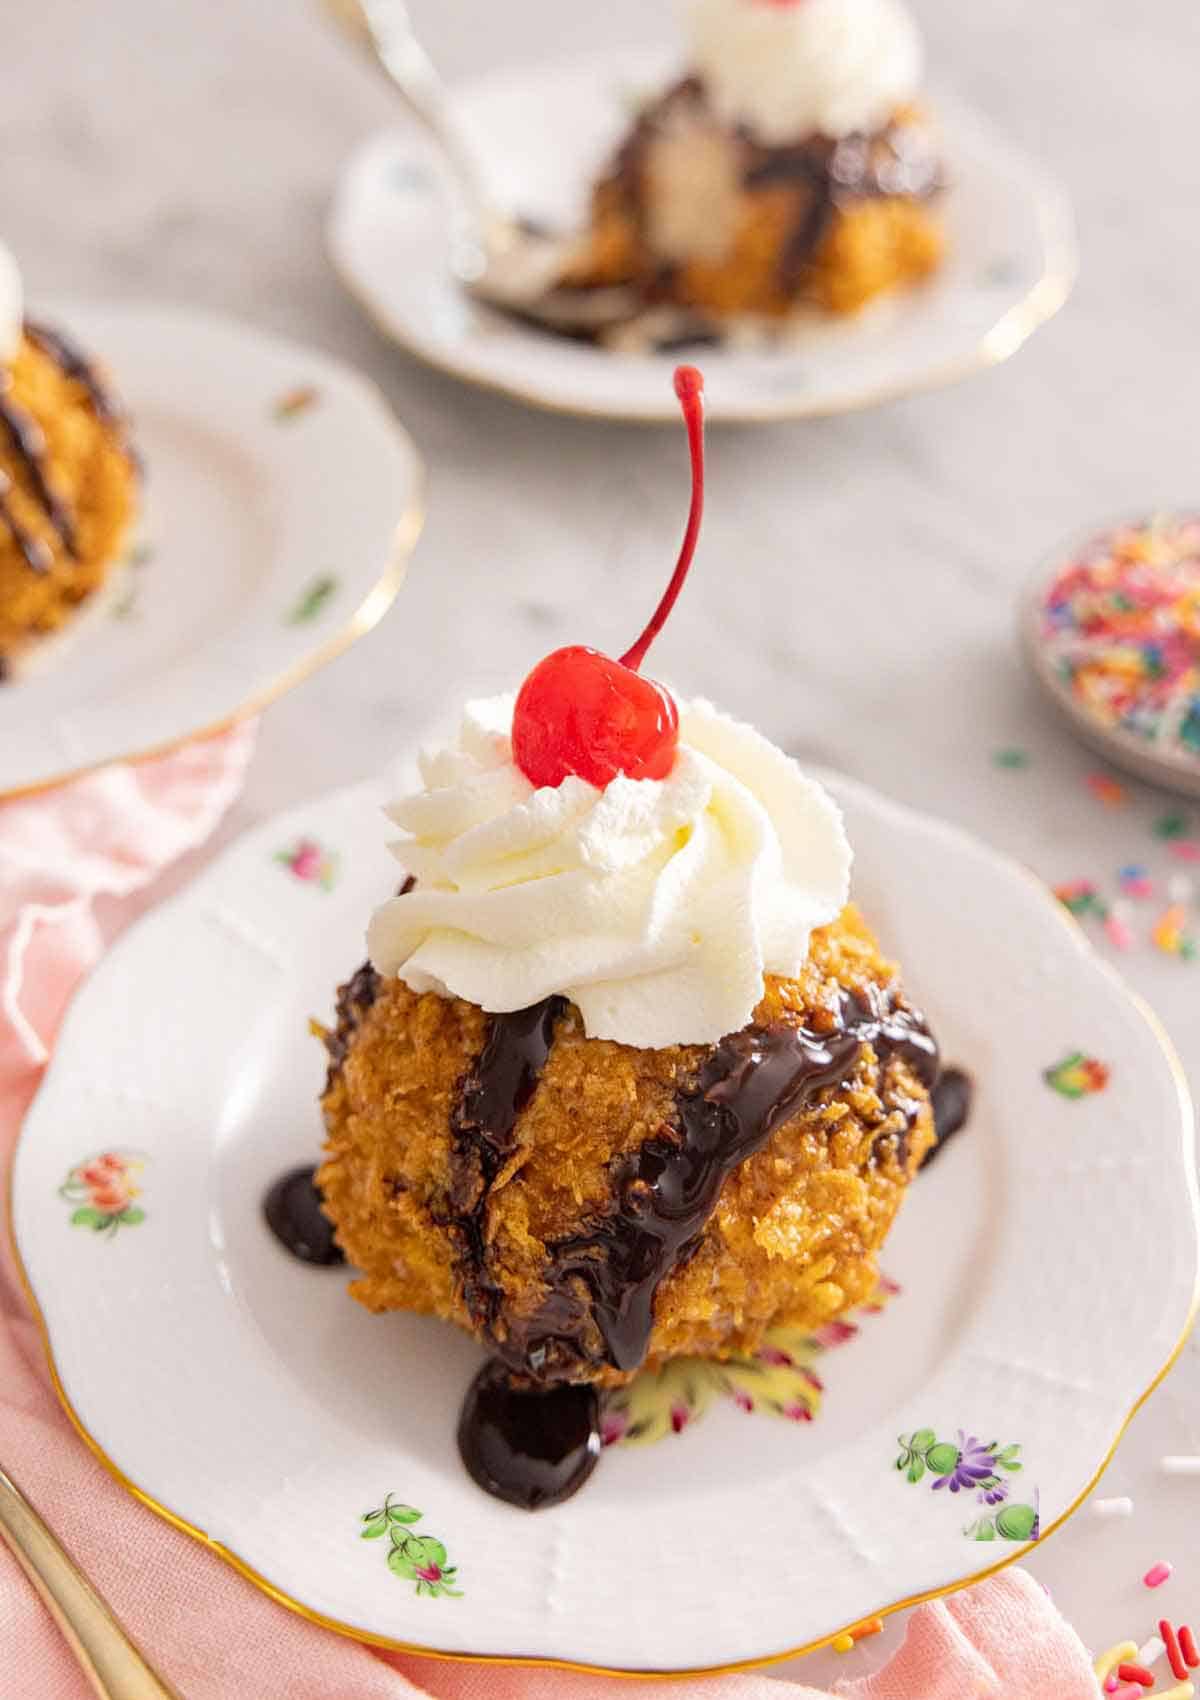 A plate with a ball of fried ice cream with chocolate drizzle and whipped cream on top with a cherry.